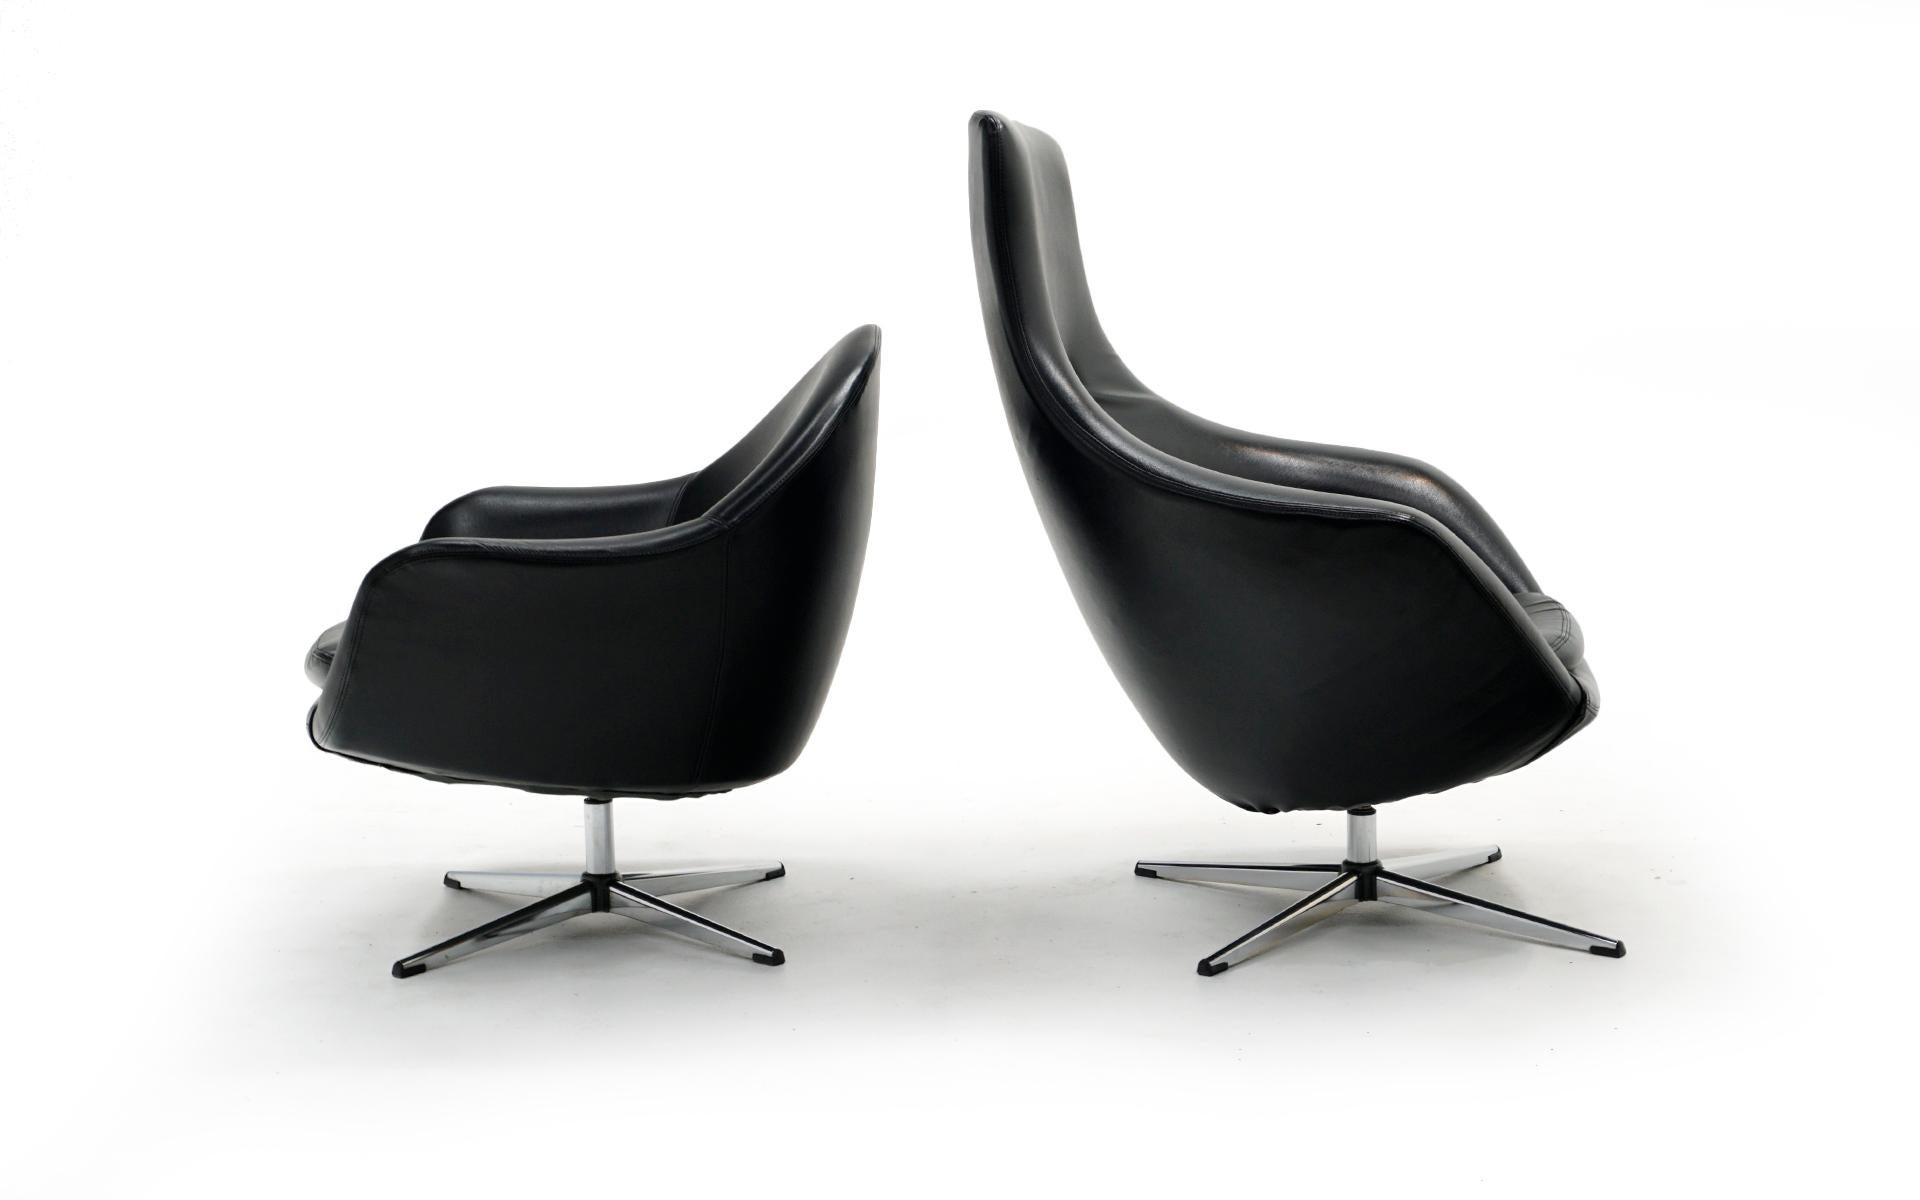 Pair of Overman black vinyl swivel chairs. Get the modern / mod look of high design at a fractioon of the price. Lightweight and easy to move these chairs are comfortable and very durable. The original black vinyl is in surprisingly good condition.